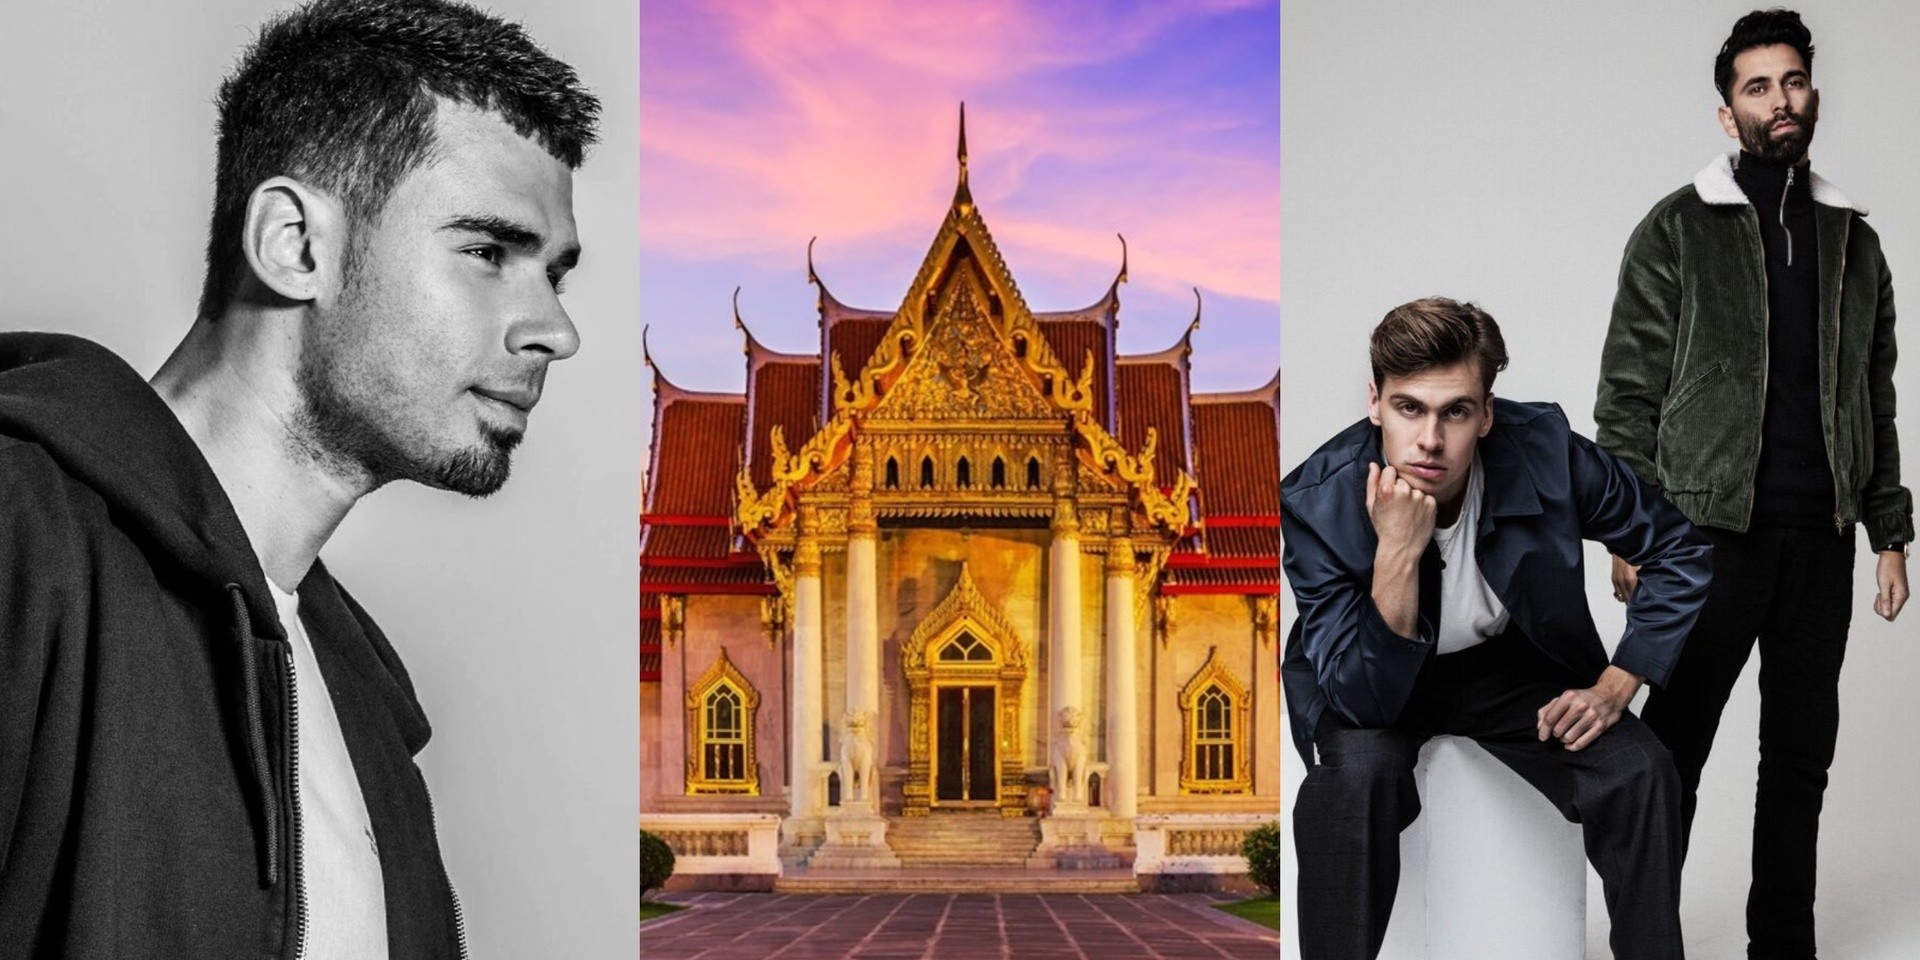 7 reasons to attend the inaugural Siam Songkran Music Festival 